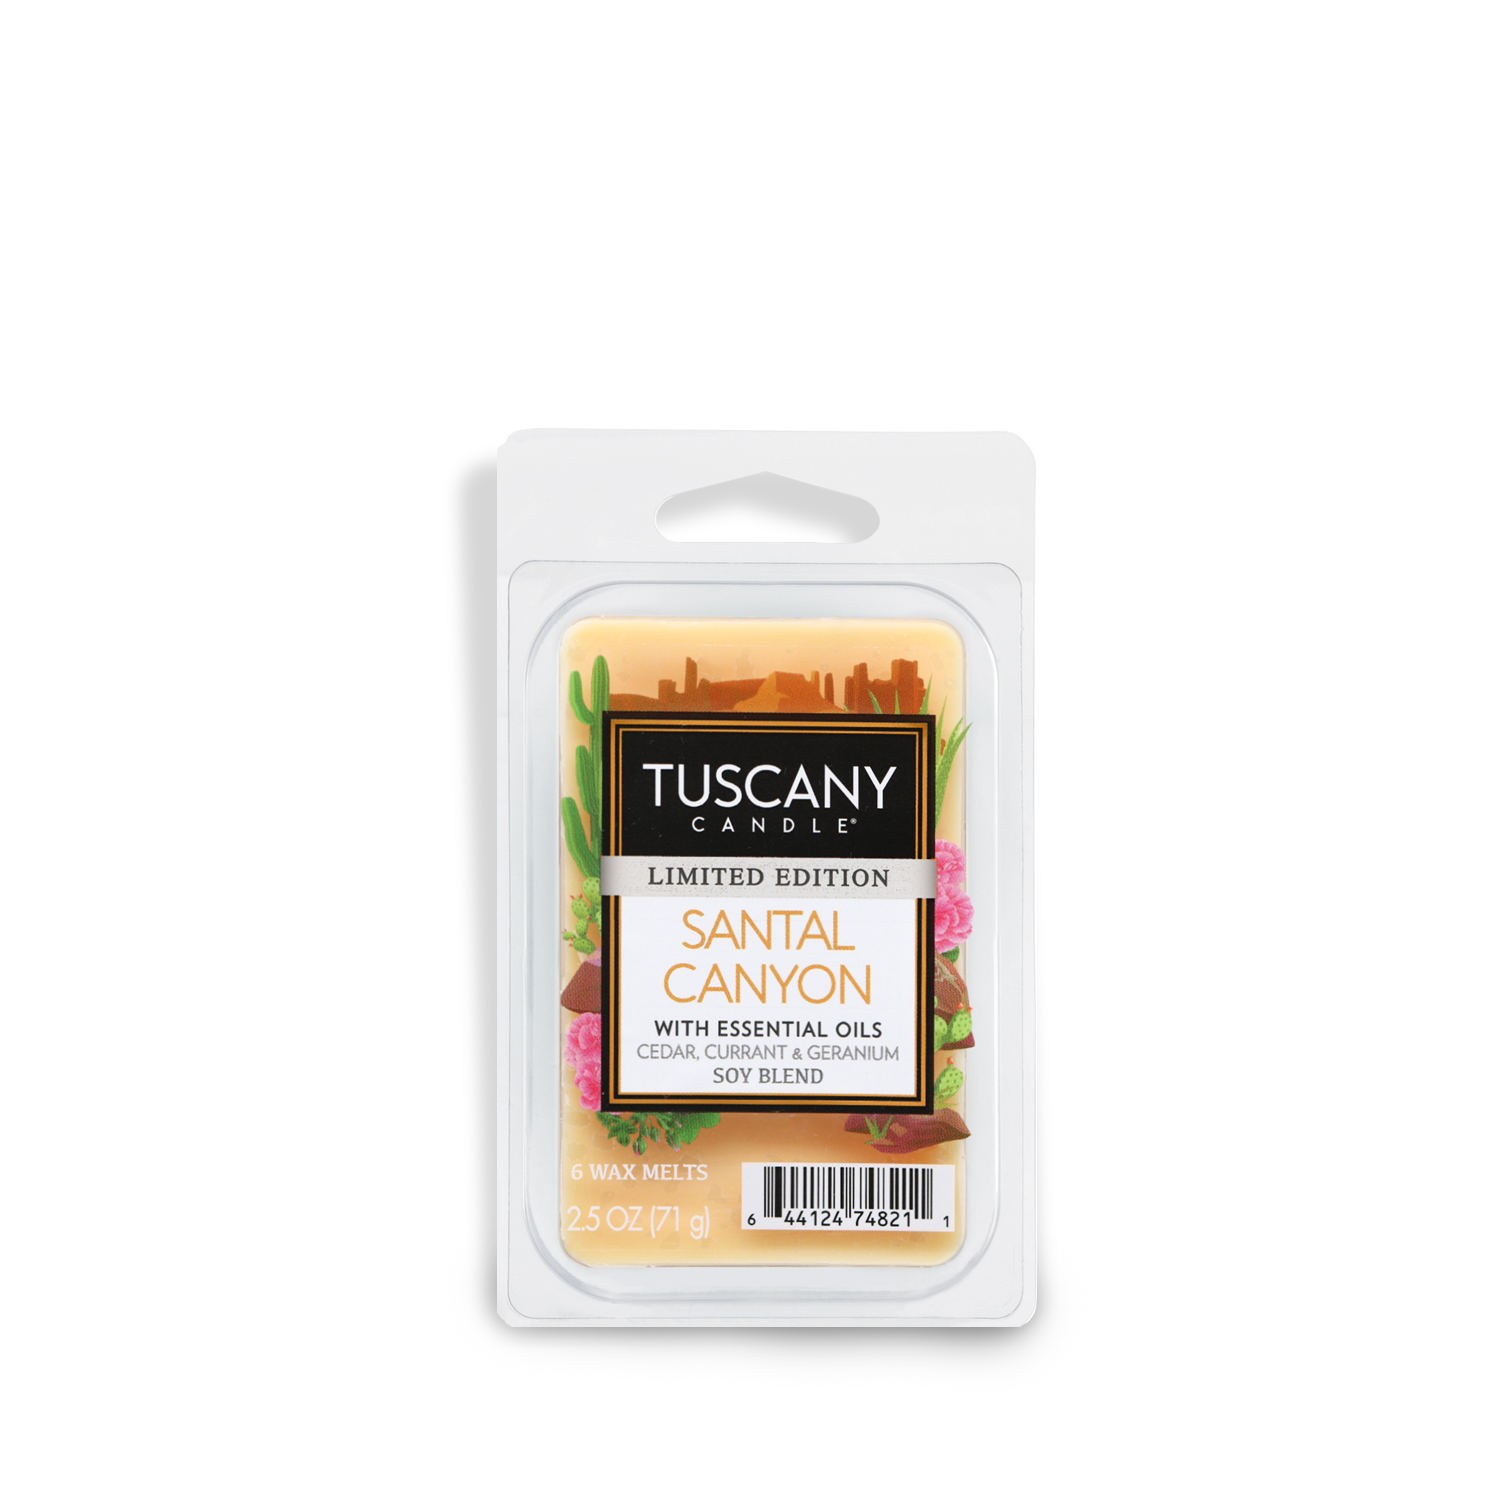 Packaged Tuscany Candle® SEASONAL Santal Canyon Scented Wax Melt (2.5 oz) with Essential Oils from the Summer Collection.